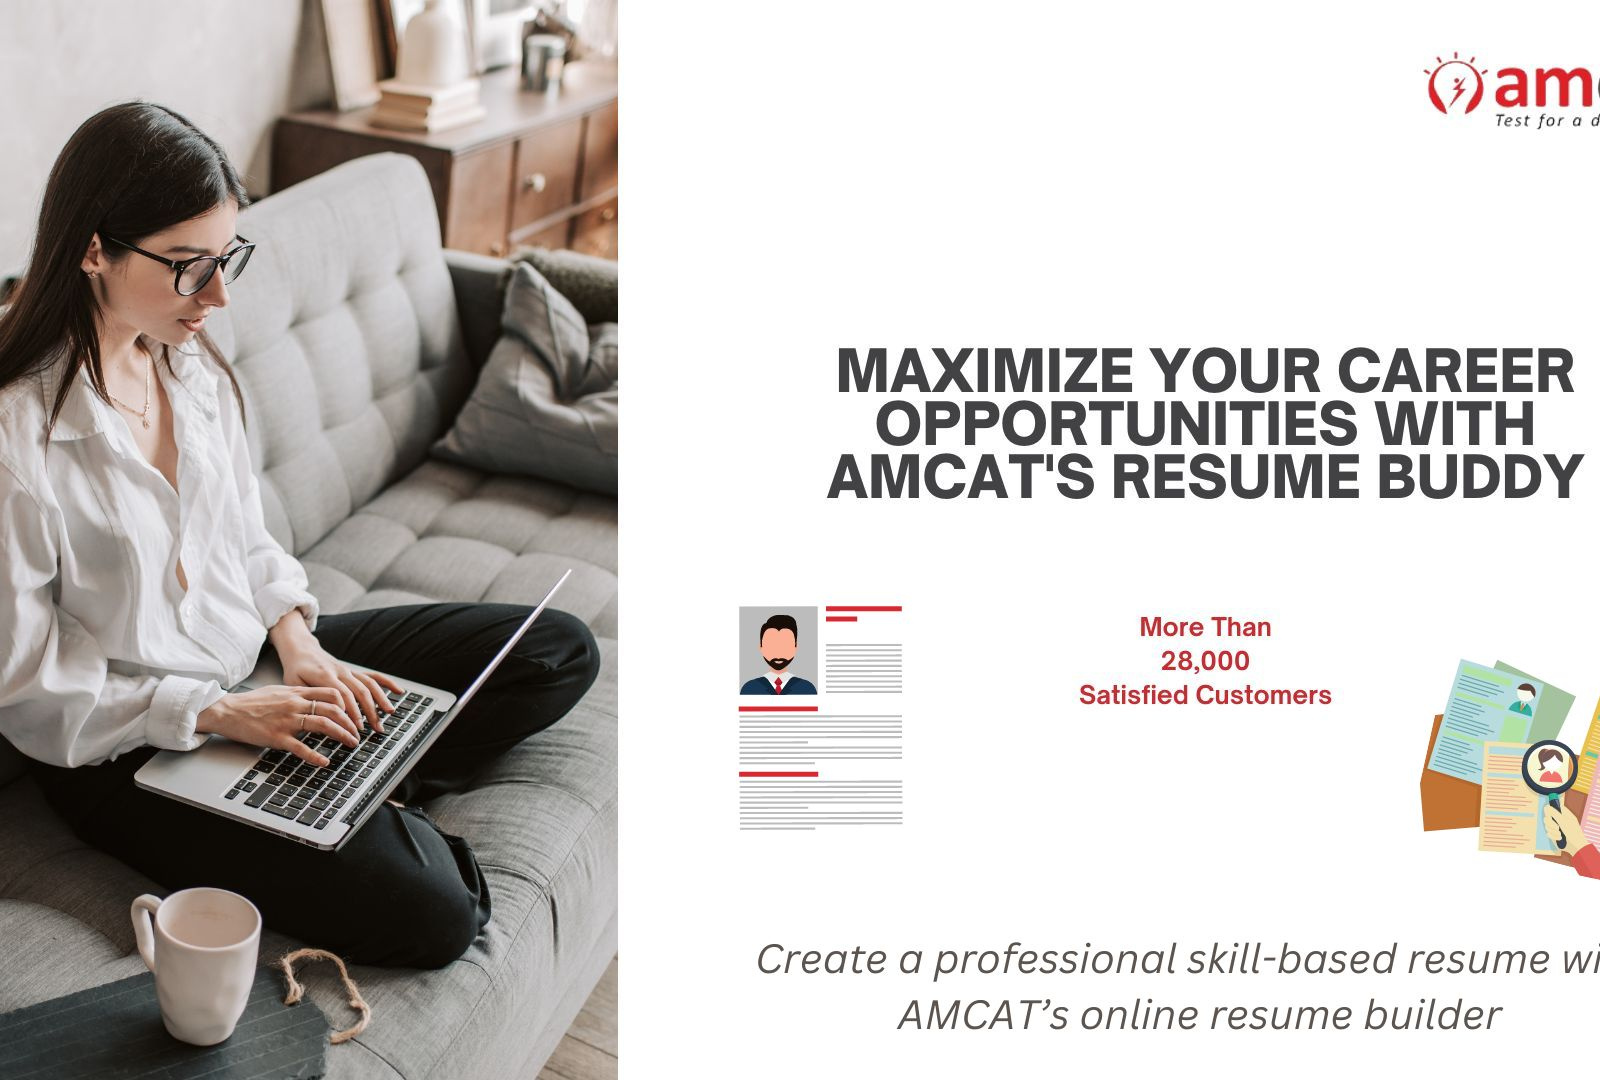 Create a Professional SkillBased Resume with Resume Buddy by Aspiring